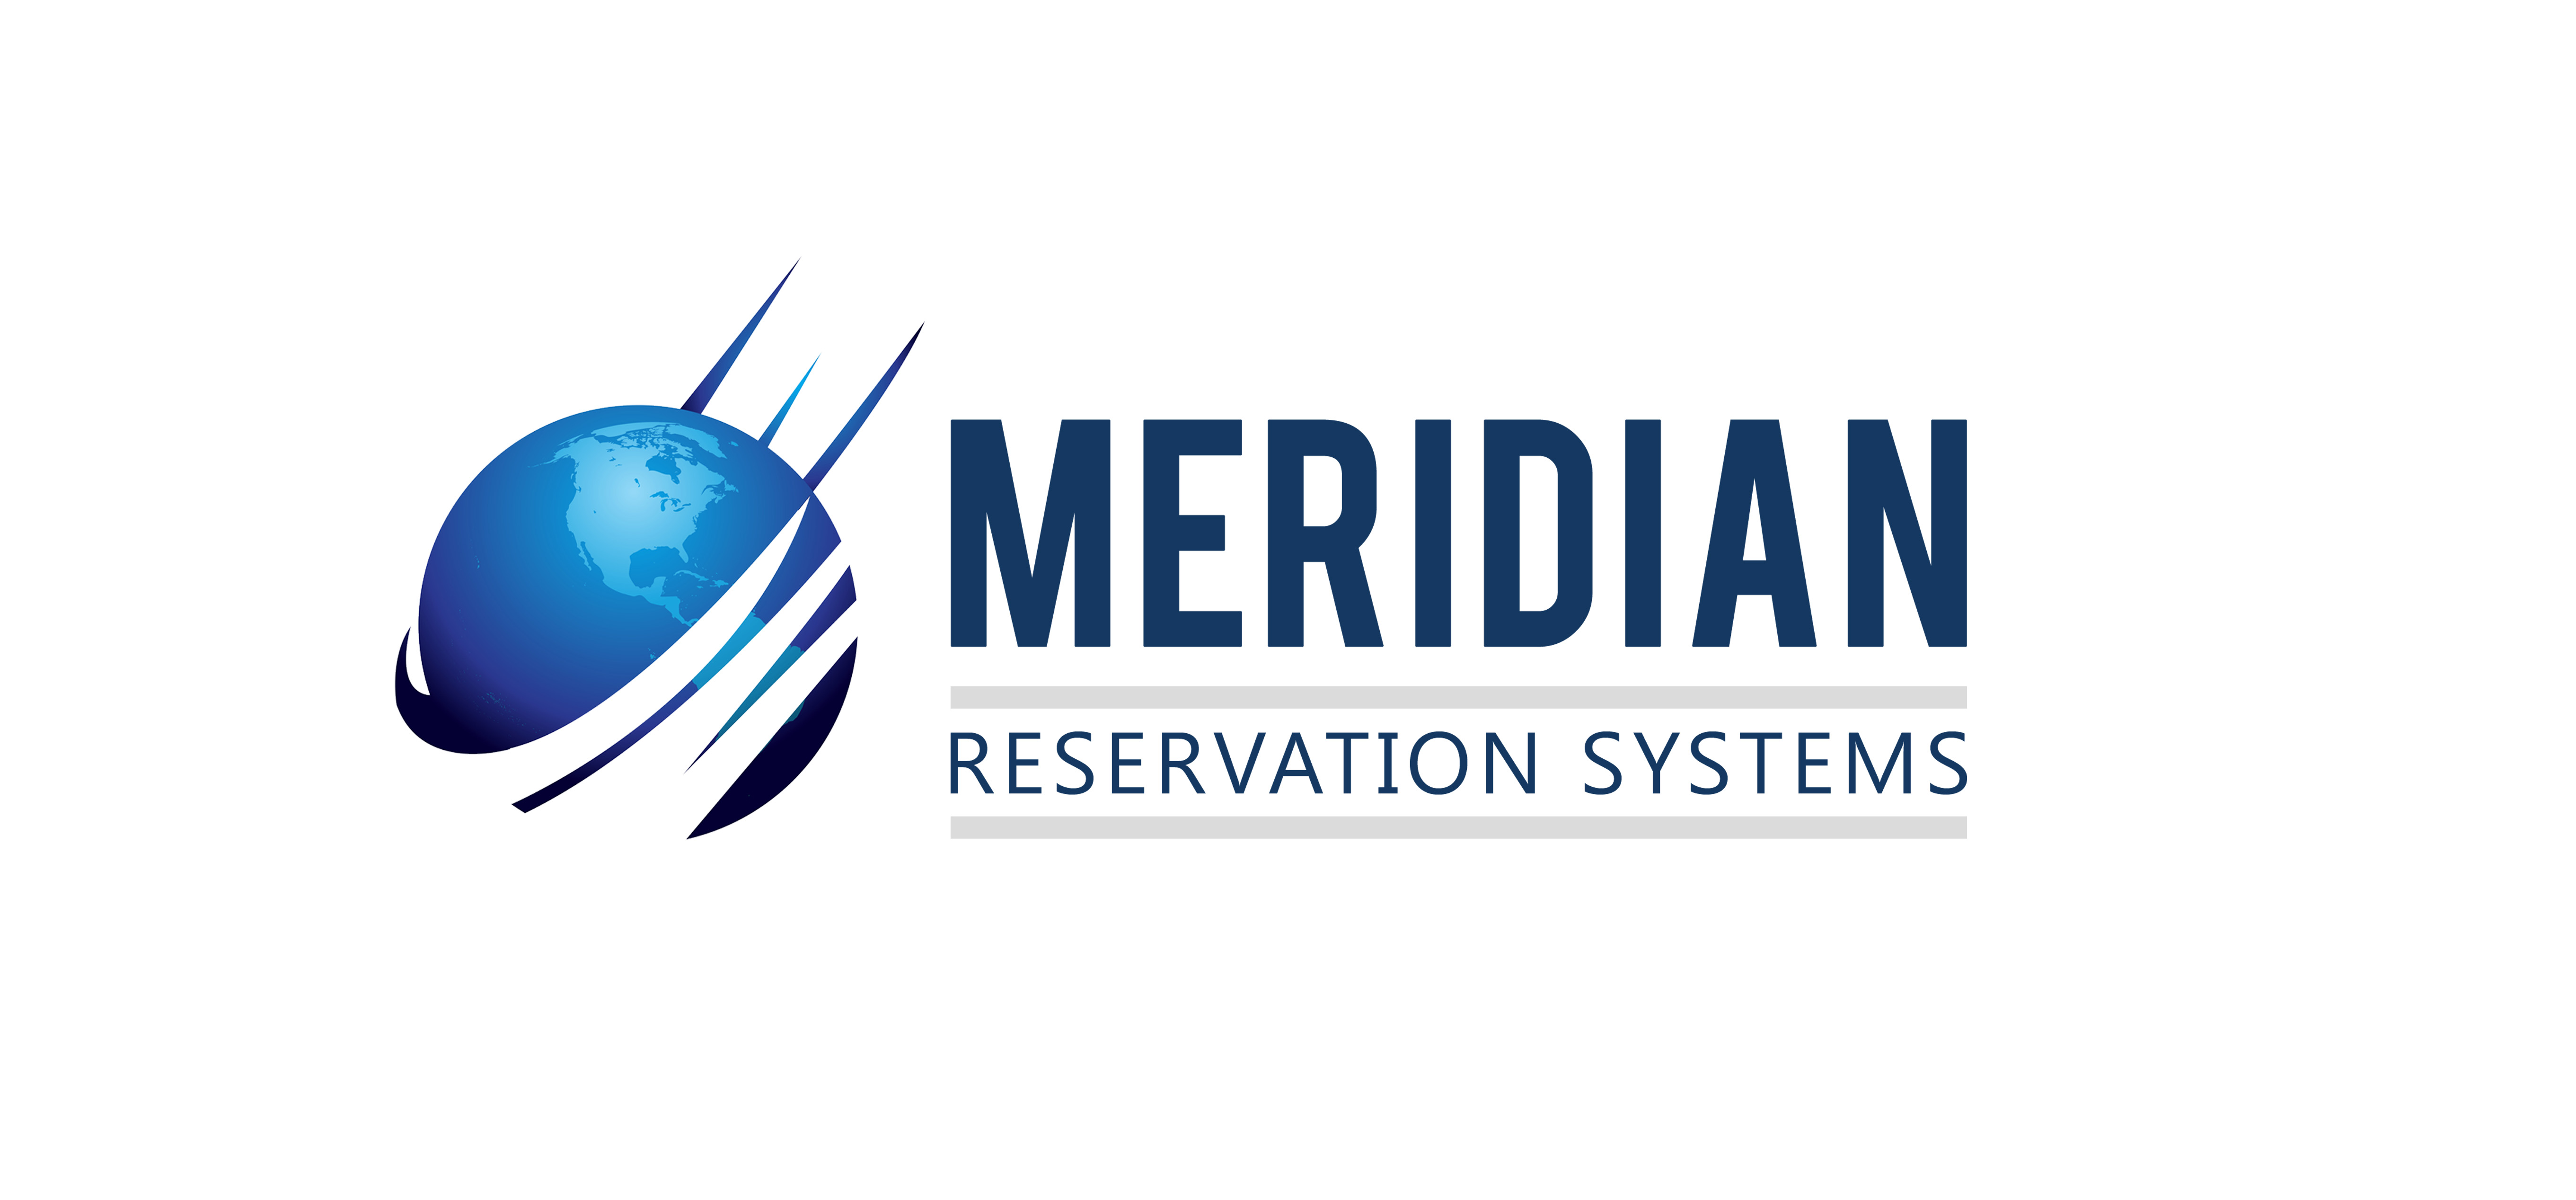 Meridian Reservation Systems